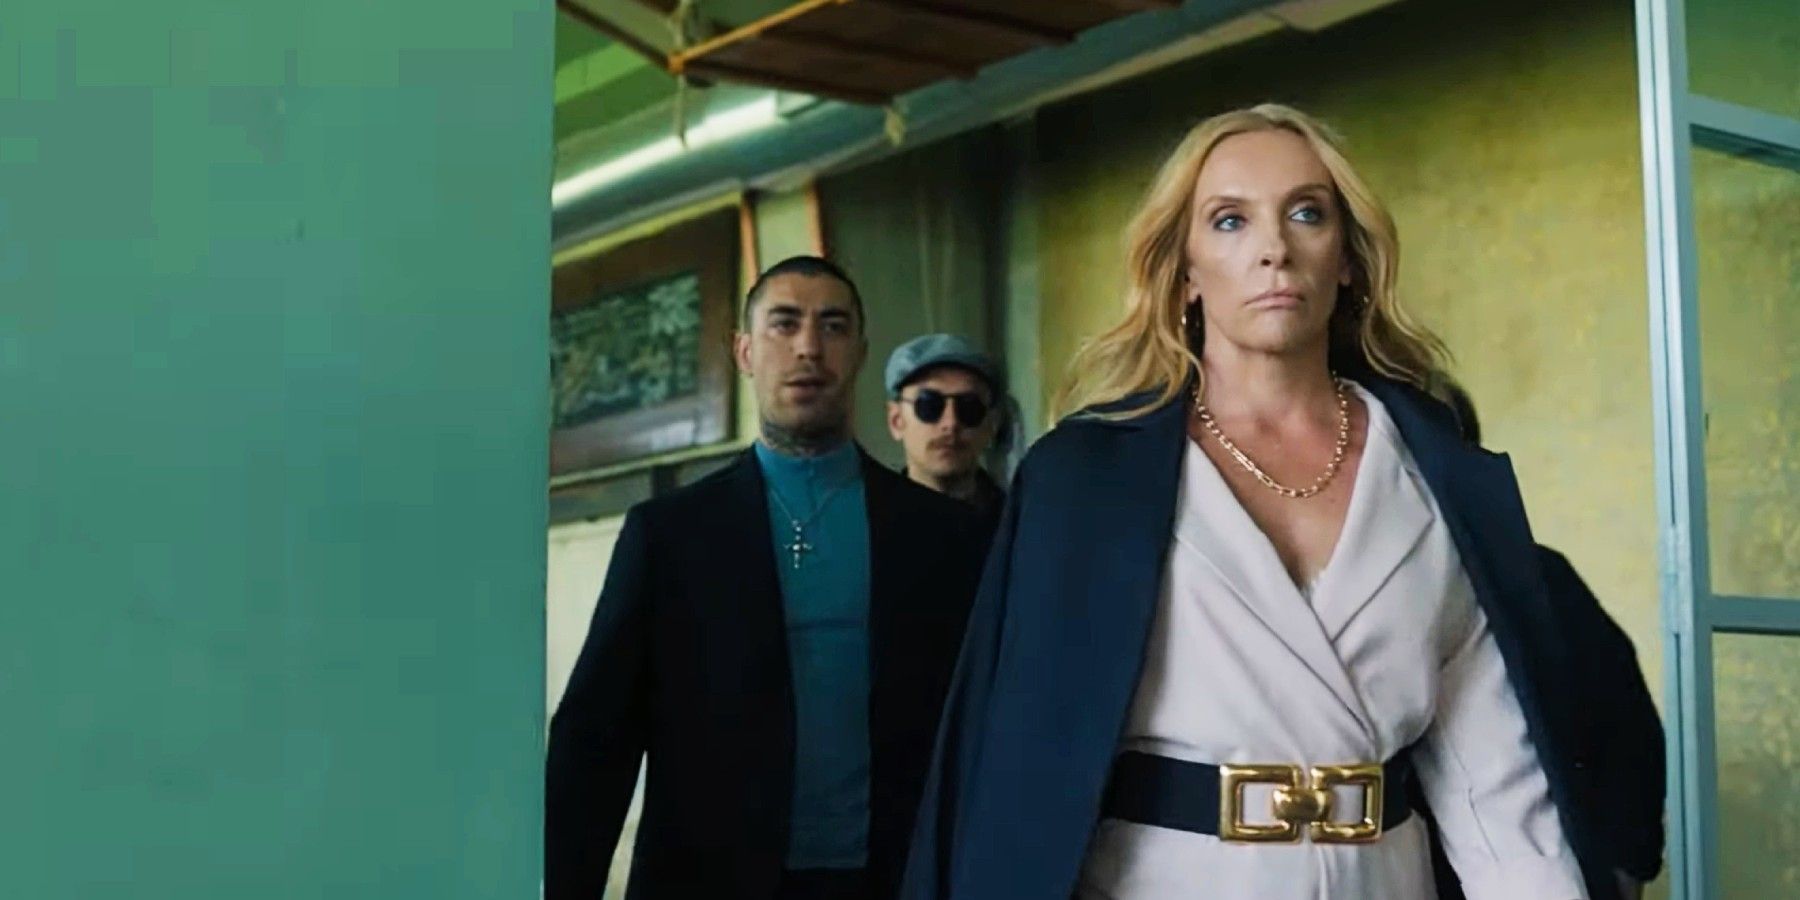 Toni Collette Is Good As An Surprising Mob Boss